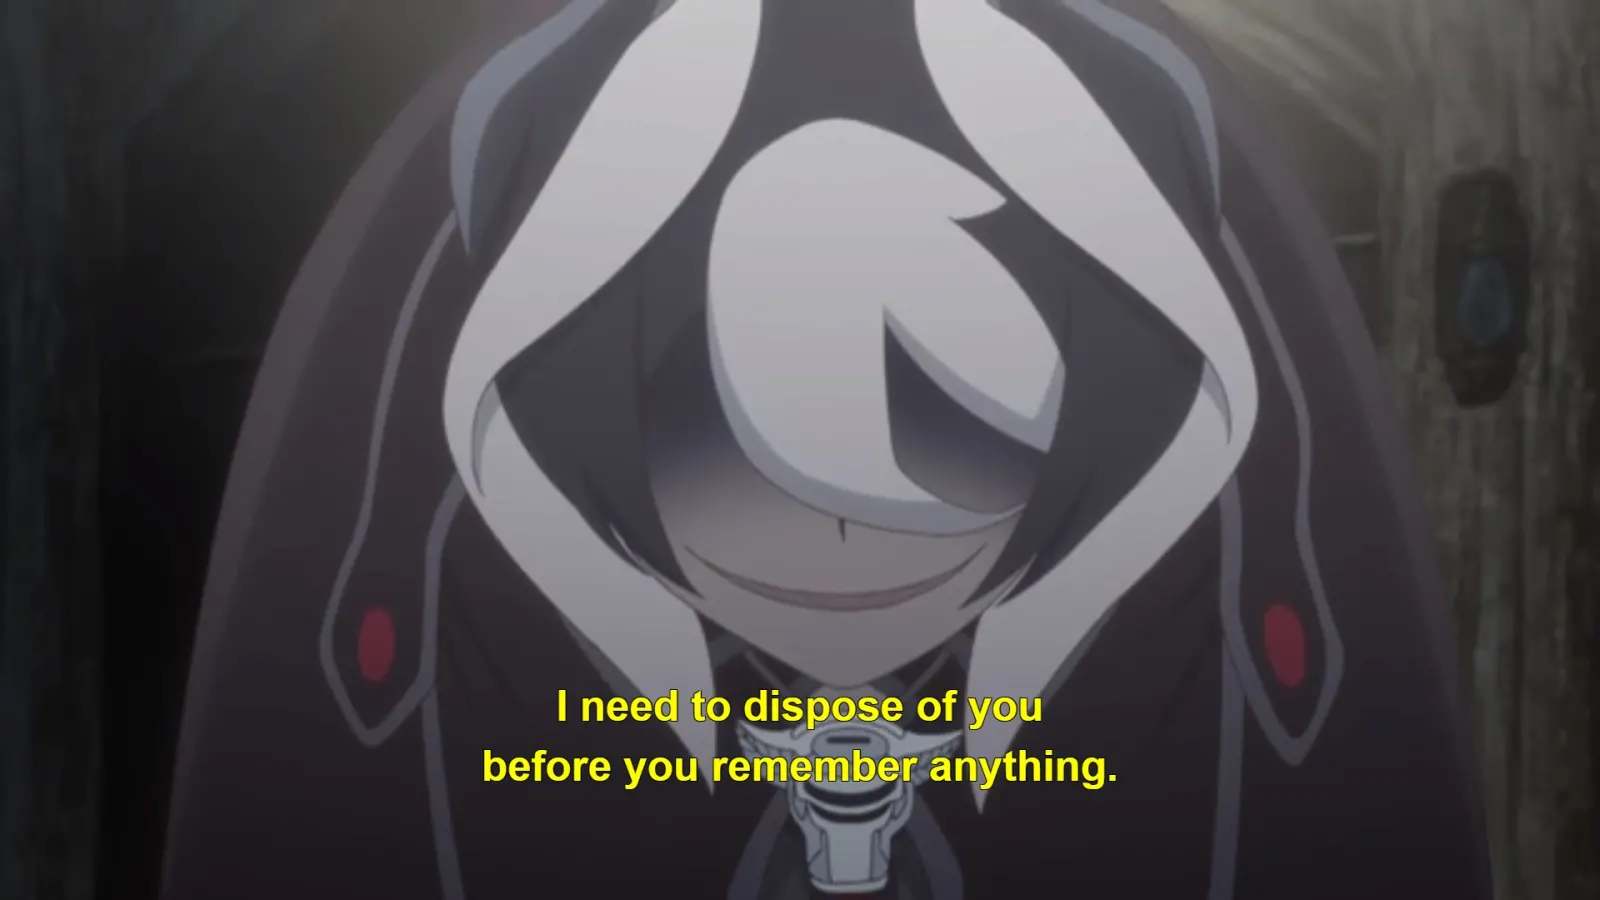 Ozen is not a nice person. If your teacher treats you like this kids, tell another adult.